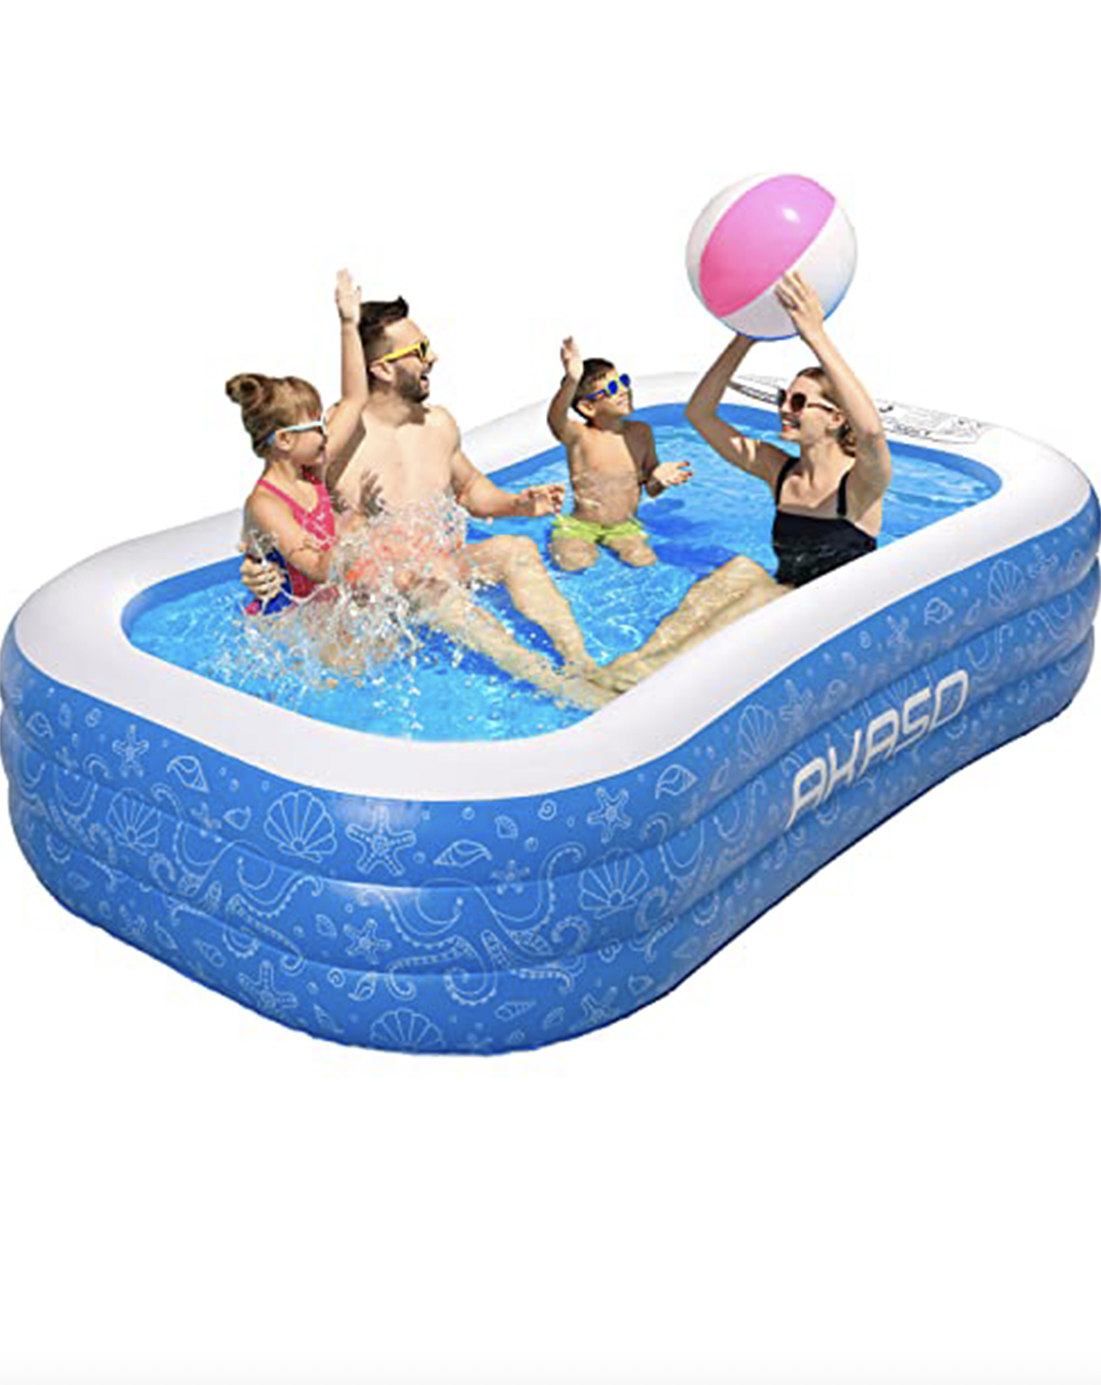 Backyard Ground Outdoor Garden Light Blue Adult Ages 3 efubaby Inflatable Pool Full-Sized Swimming Pools 10 ft Blow up Pool Inflatable Pools for Adults Kids Pool for Backyard Pools for Kiddie 